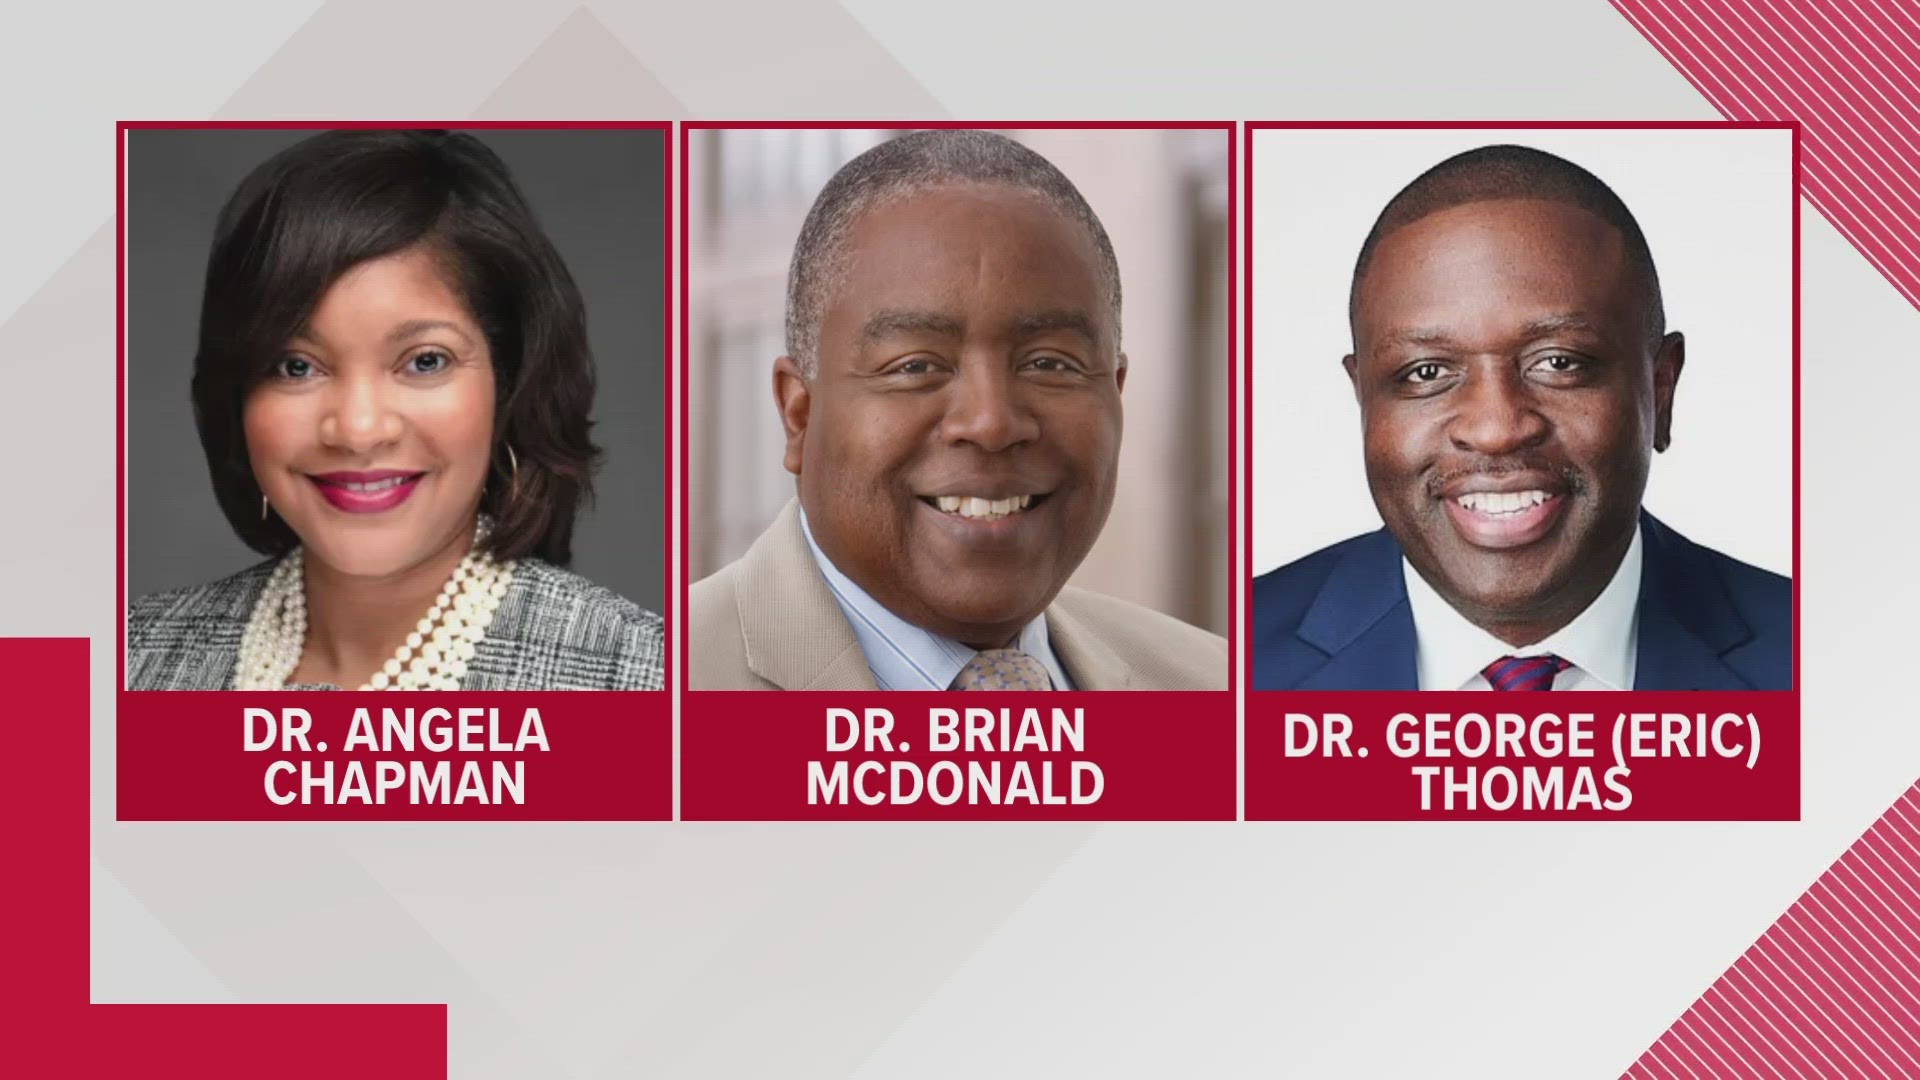 The district announced Dr. Angela Chapman, Dr. Brian McDonald and Dr. Eric Thomas as the final three candidates for the superintendent role.